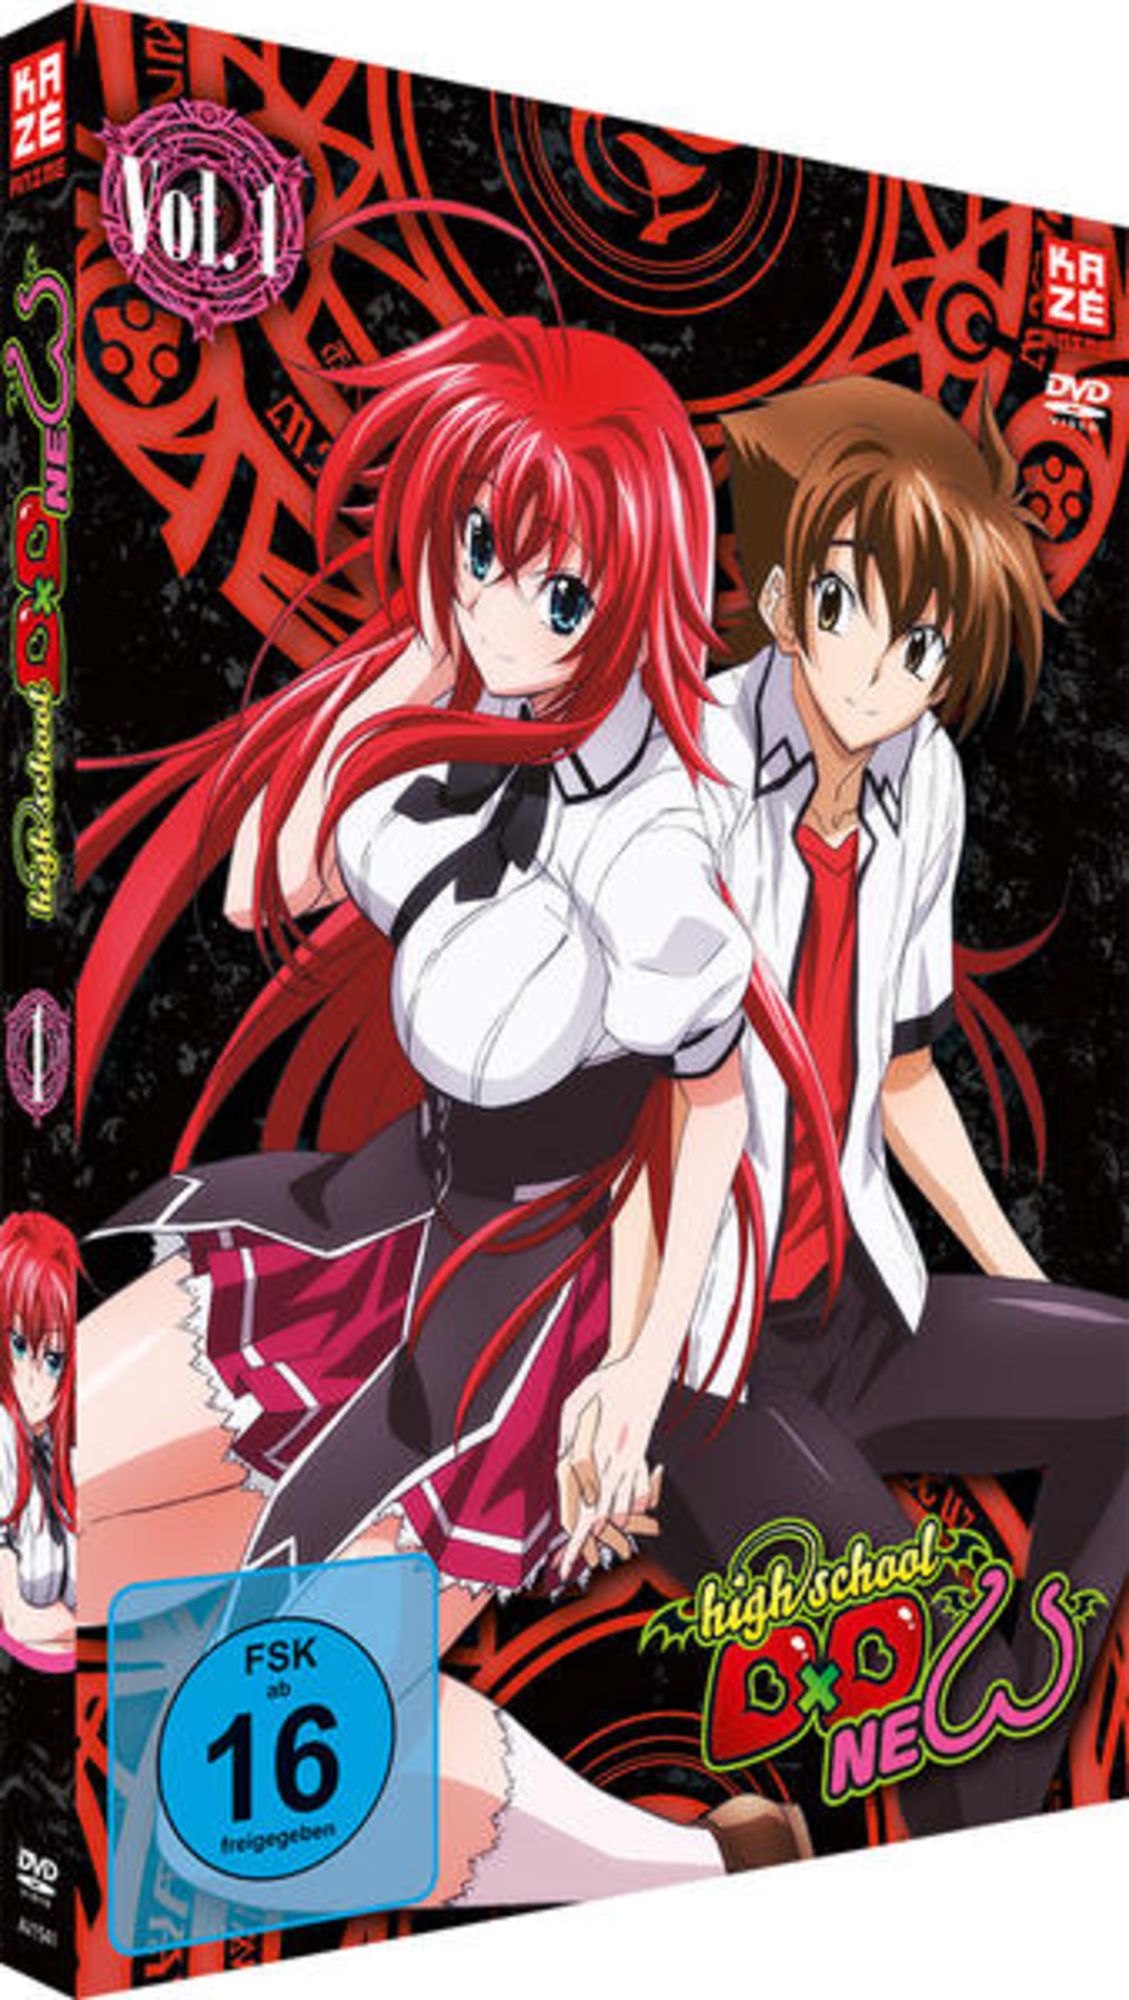 carlo clarin recommends Highschool Dxd Dubbed Episode 1